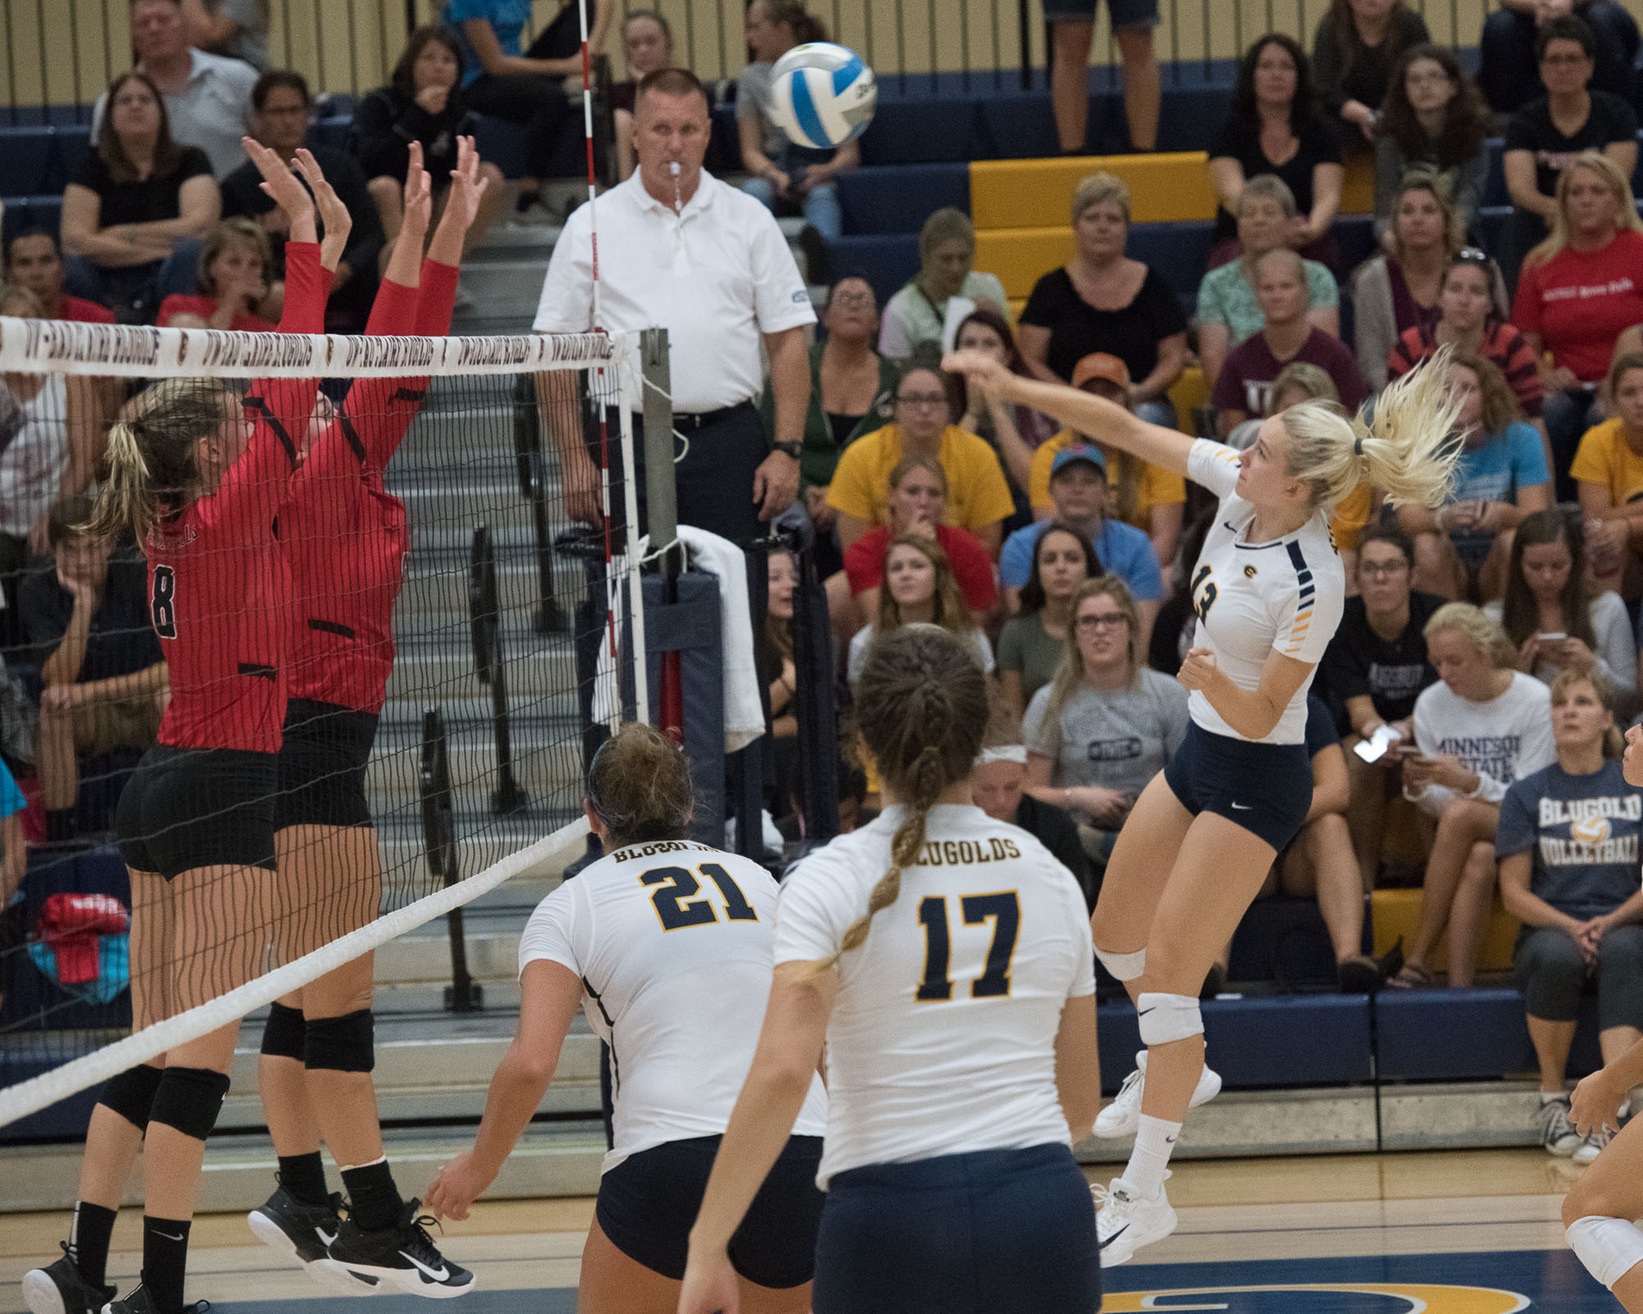 Blugolds Volleyball avenges previous loss to No. 17 St. Thomas